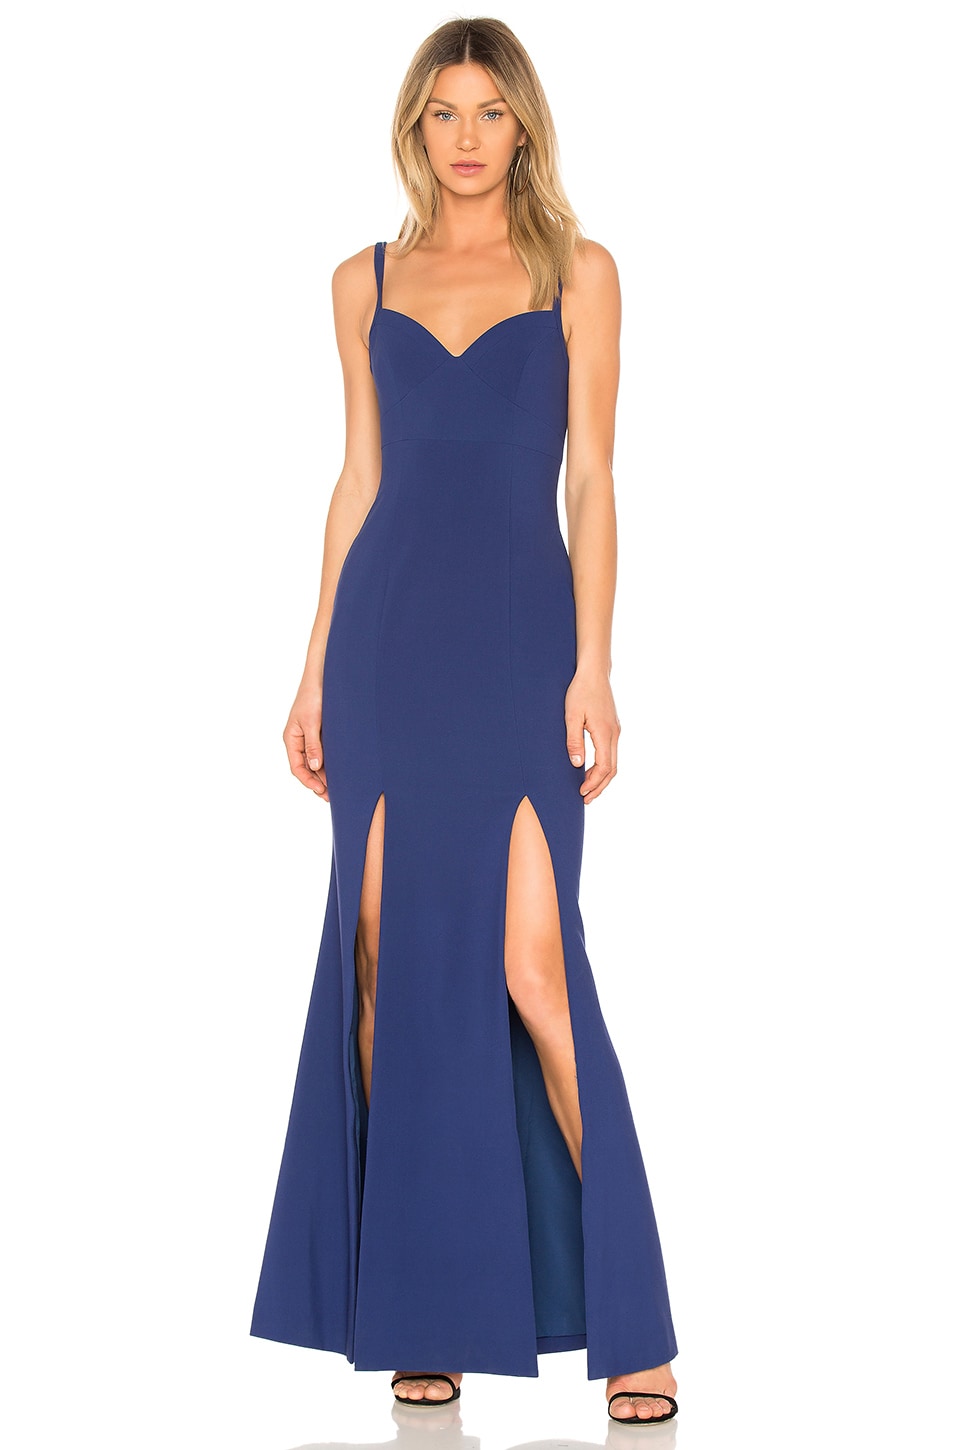 LIKELY Alameda Gown in Blueprint | REVOLVE